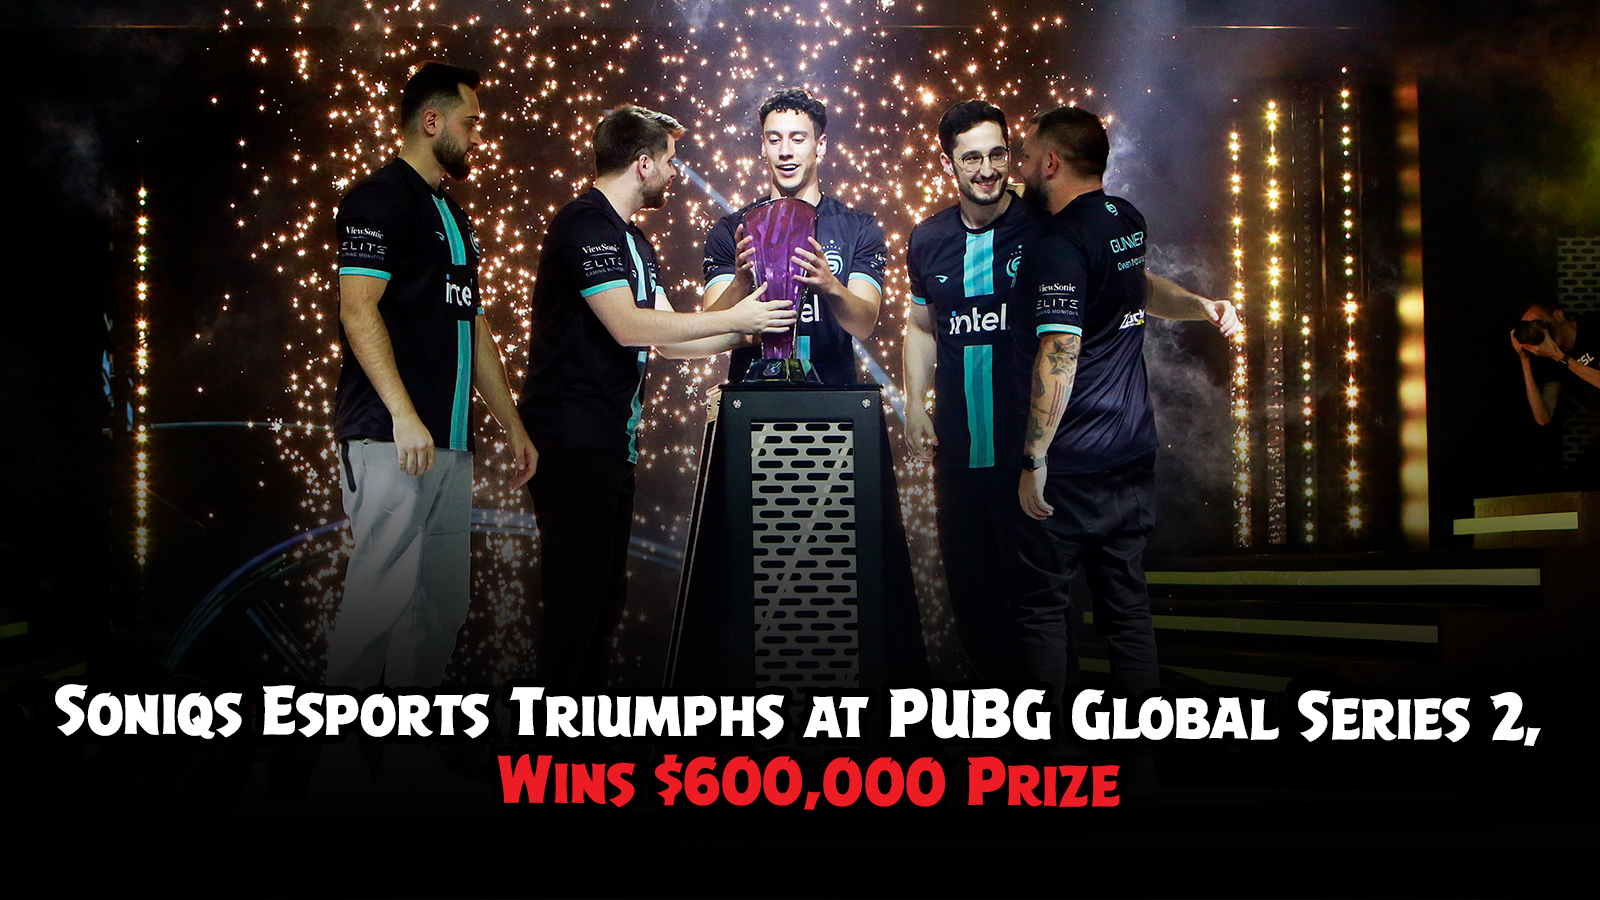 Soniqs Esports Clinch PUBG Global Series 2 Title and $600,000 Prize at Gamers8